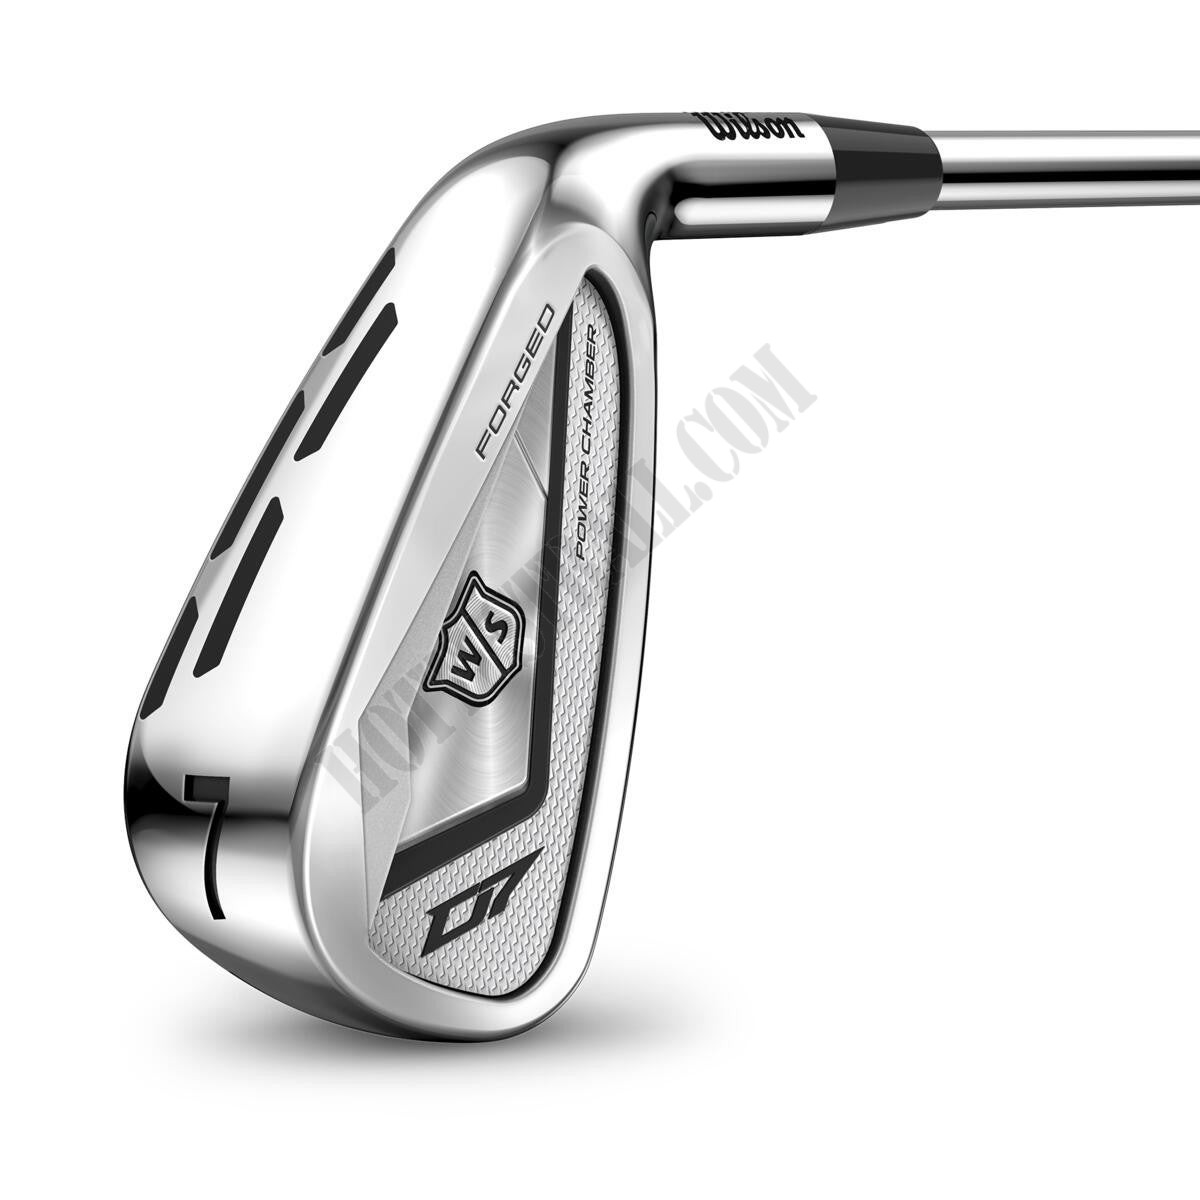 Wilson Staff D7 Forged Irons - Steel (4-PW) - Wilson Discount Store - -1